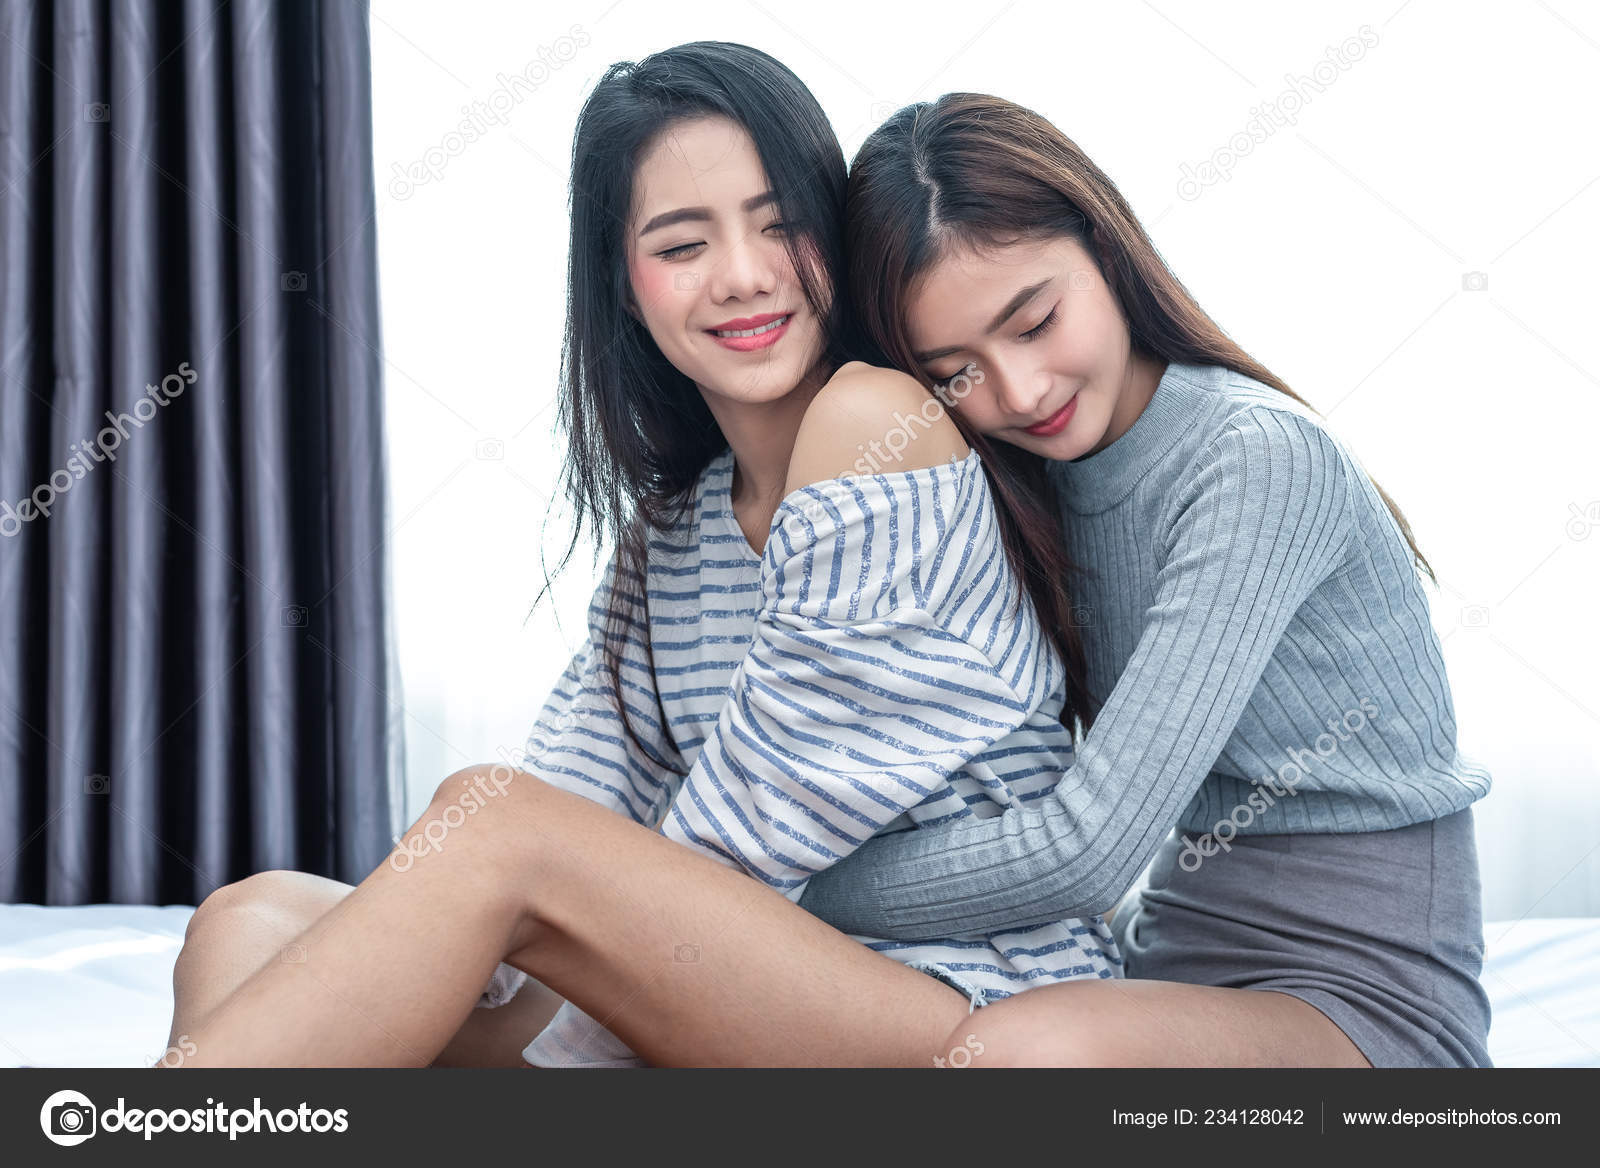 Two Asian Lesbian Women Hug Embracing Together Bedroom Couple People Stock Photo by ©shutter2u 234128042